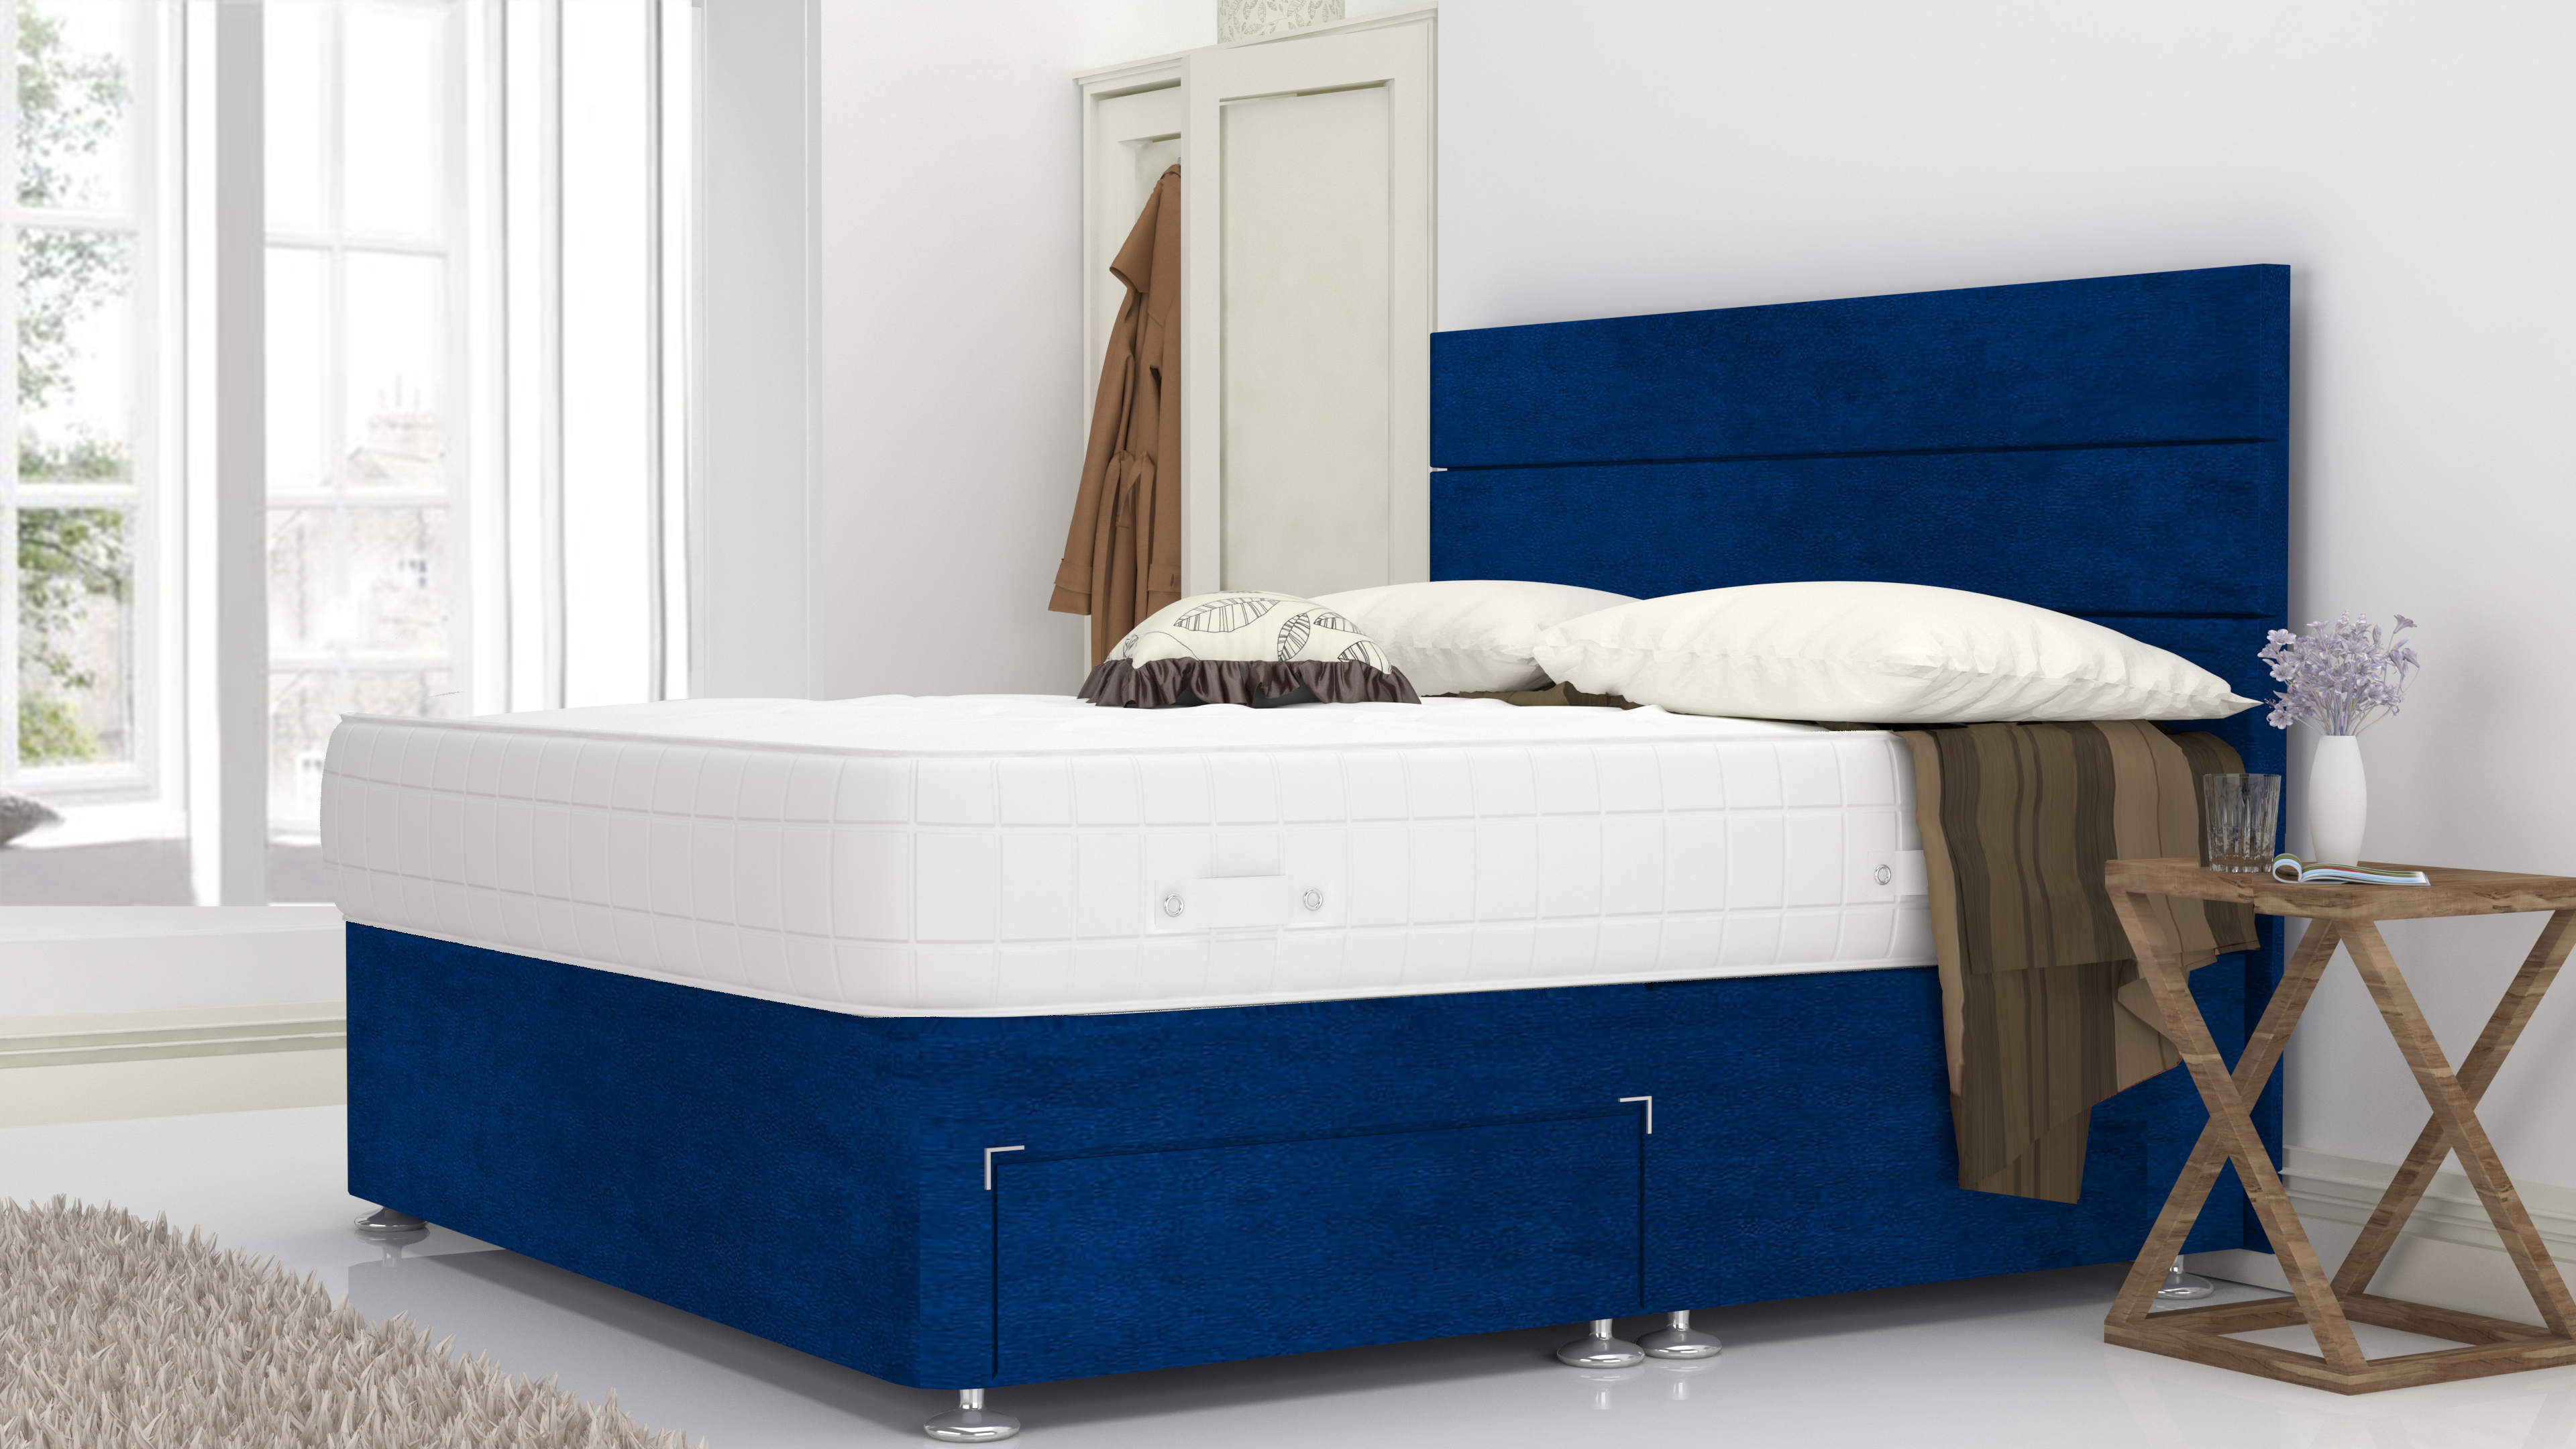 Blue Plush 5 Feet Divan Bed Set With 3 Panel Headboard (Included Feet) And Free Pillow Top Mattress